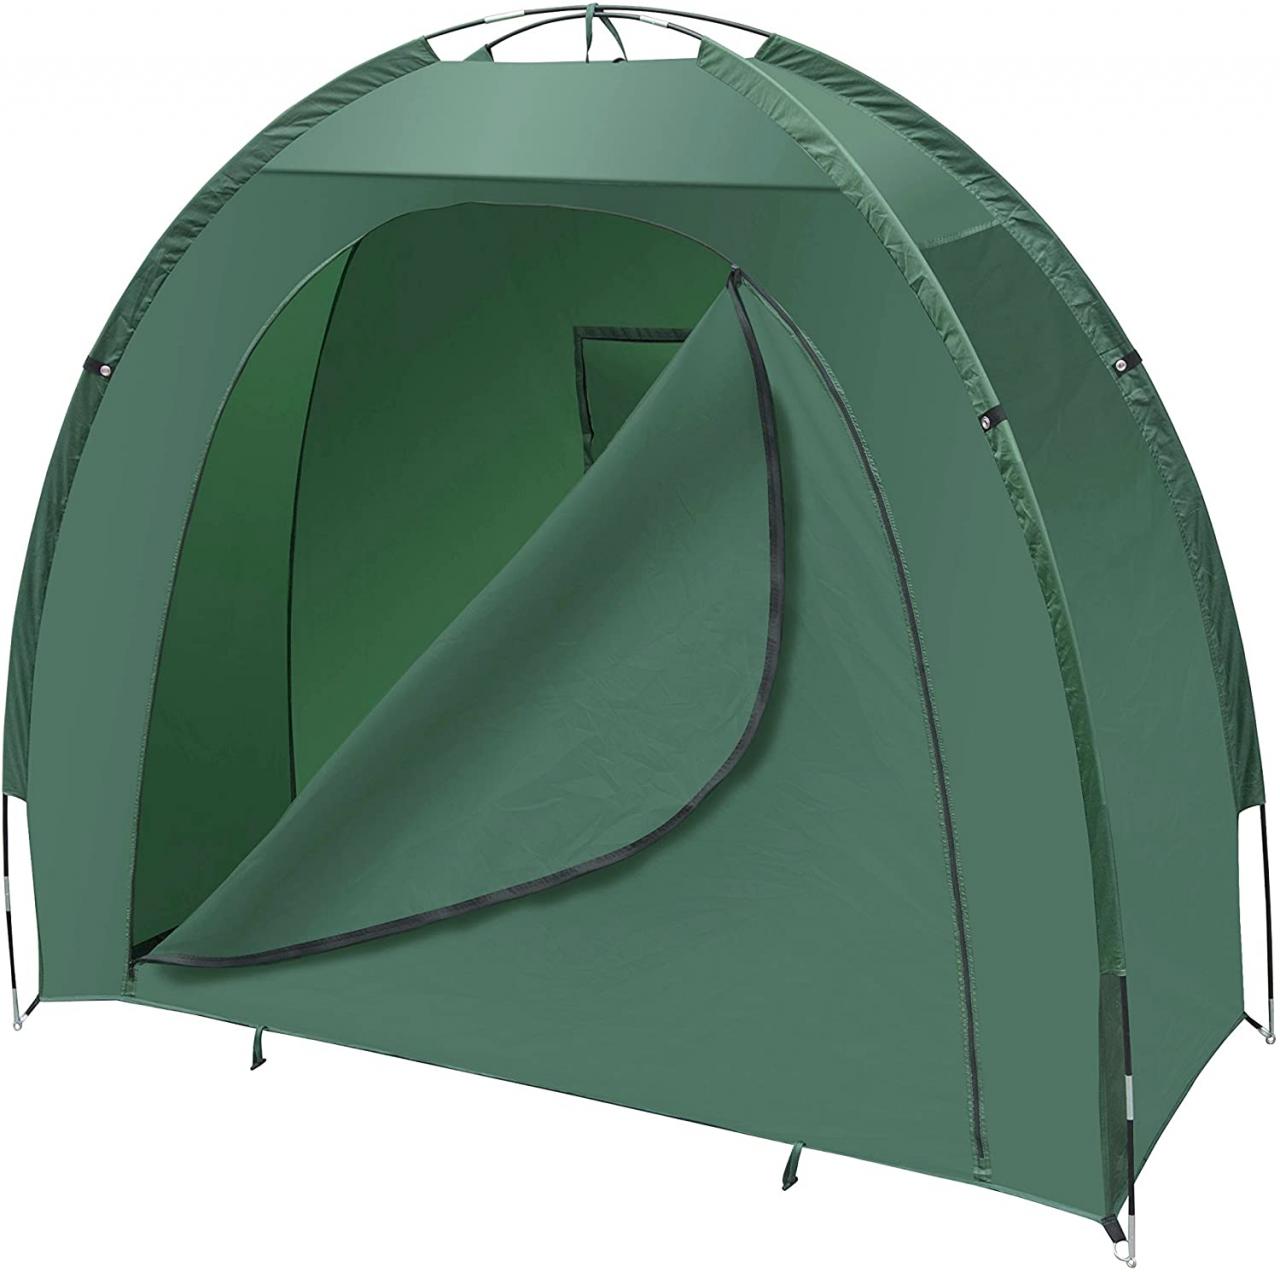 ALEKO BS70GR Portable Pop up Bike Tent Bicycle Storage Shed Weather  Resistant Protection Outdoor with Carrying Case 82 X 70 X 34 inches Green :  Amazon.ca: Patio, Lawn & Garden